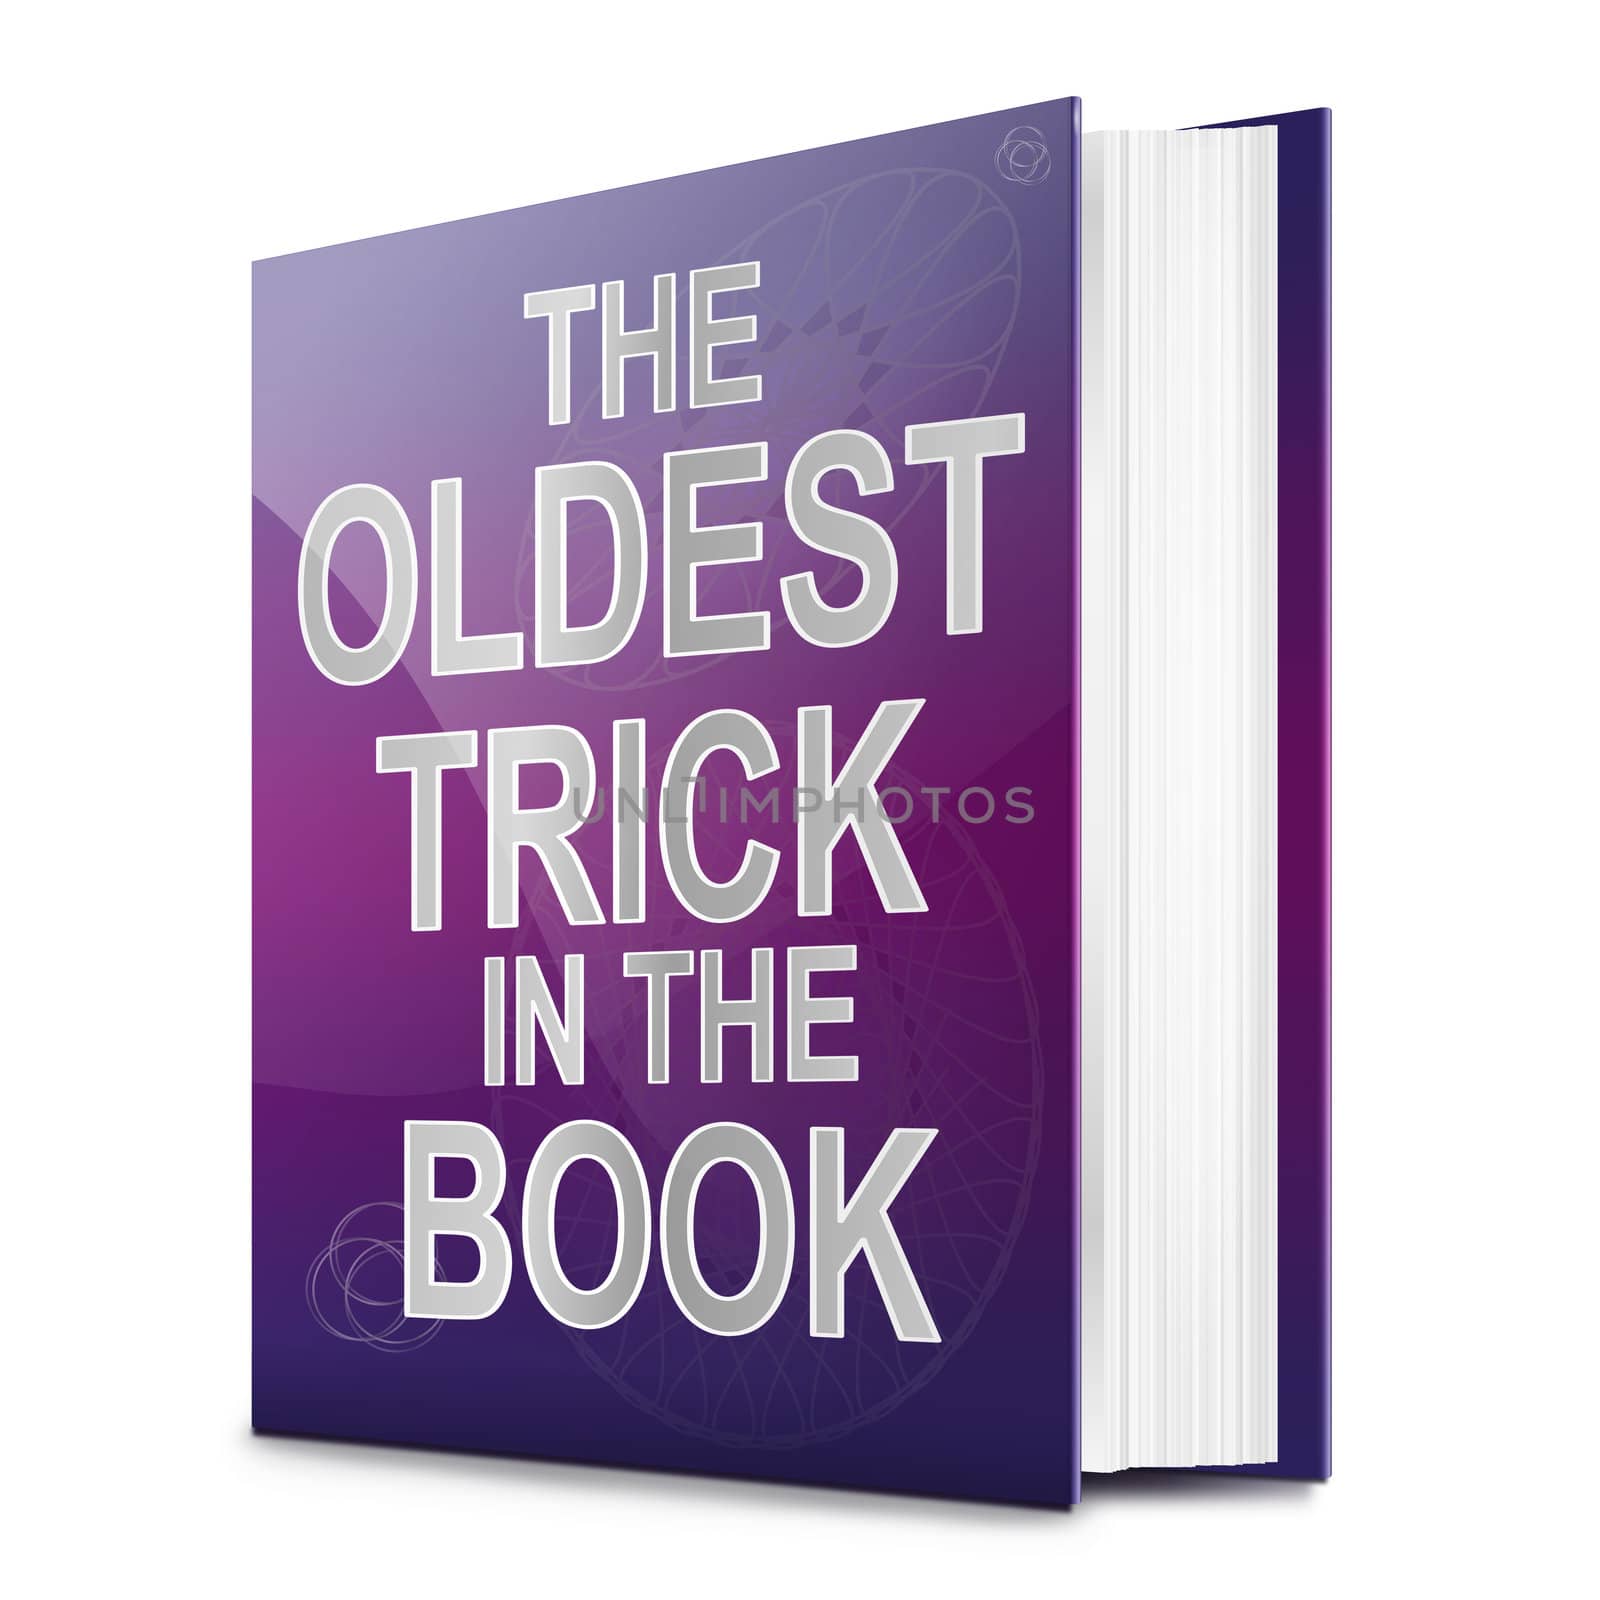 Illustration depicting a book with the oldest trick in the book concept title. White background.